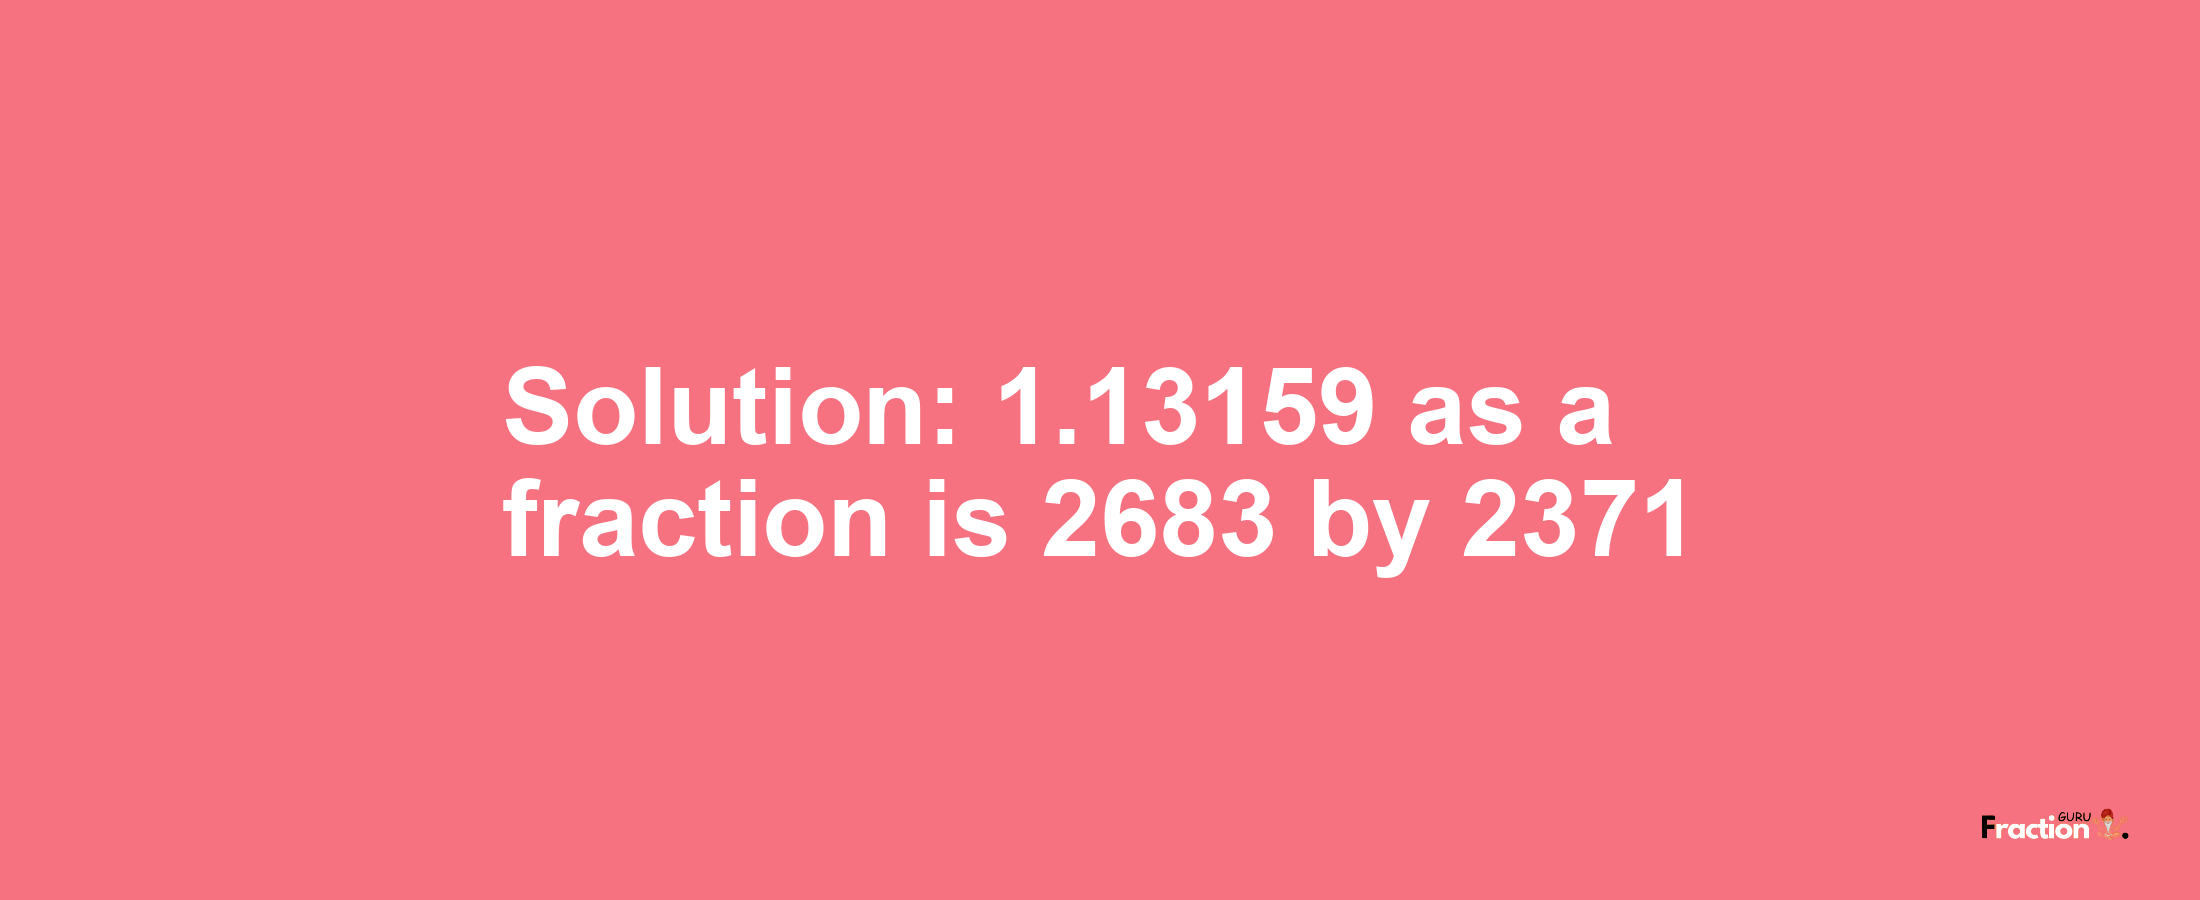 Solution:1.13159 as a fraction is 2683/2371